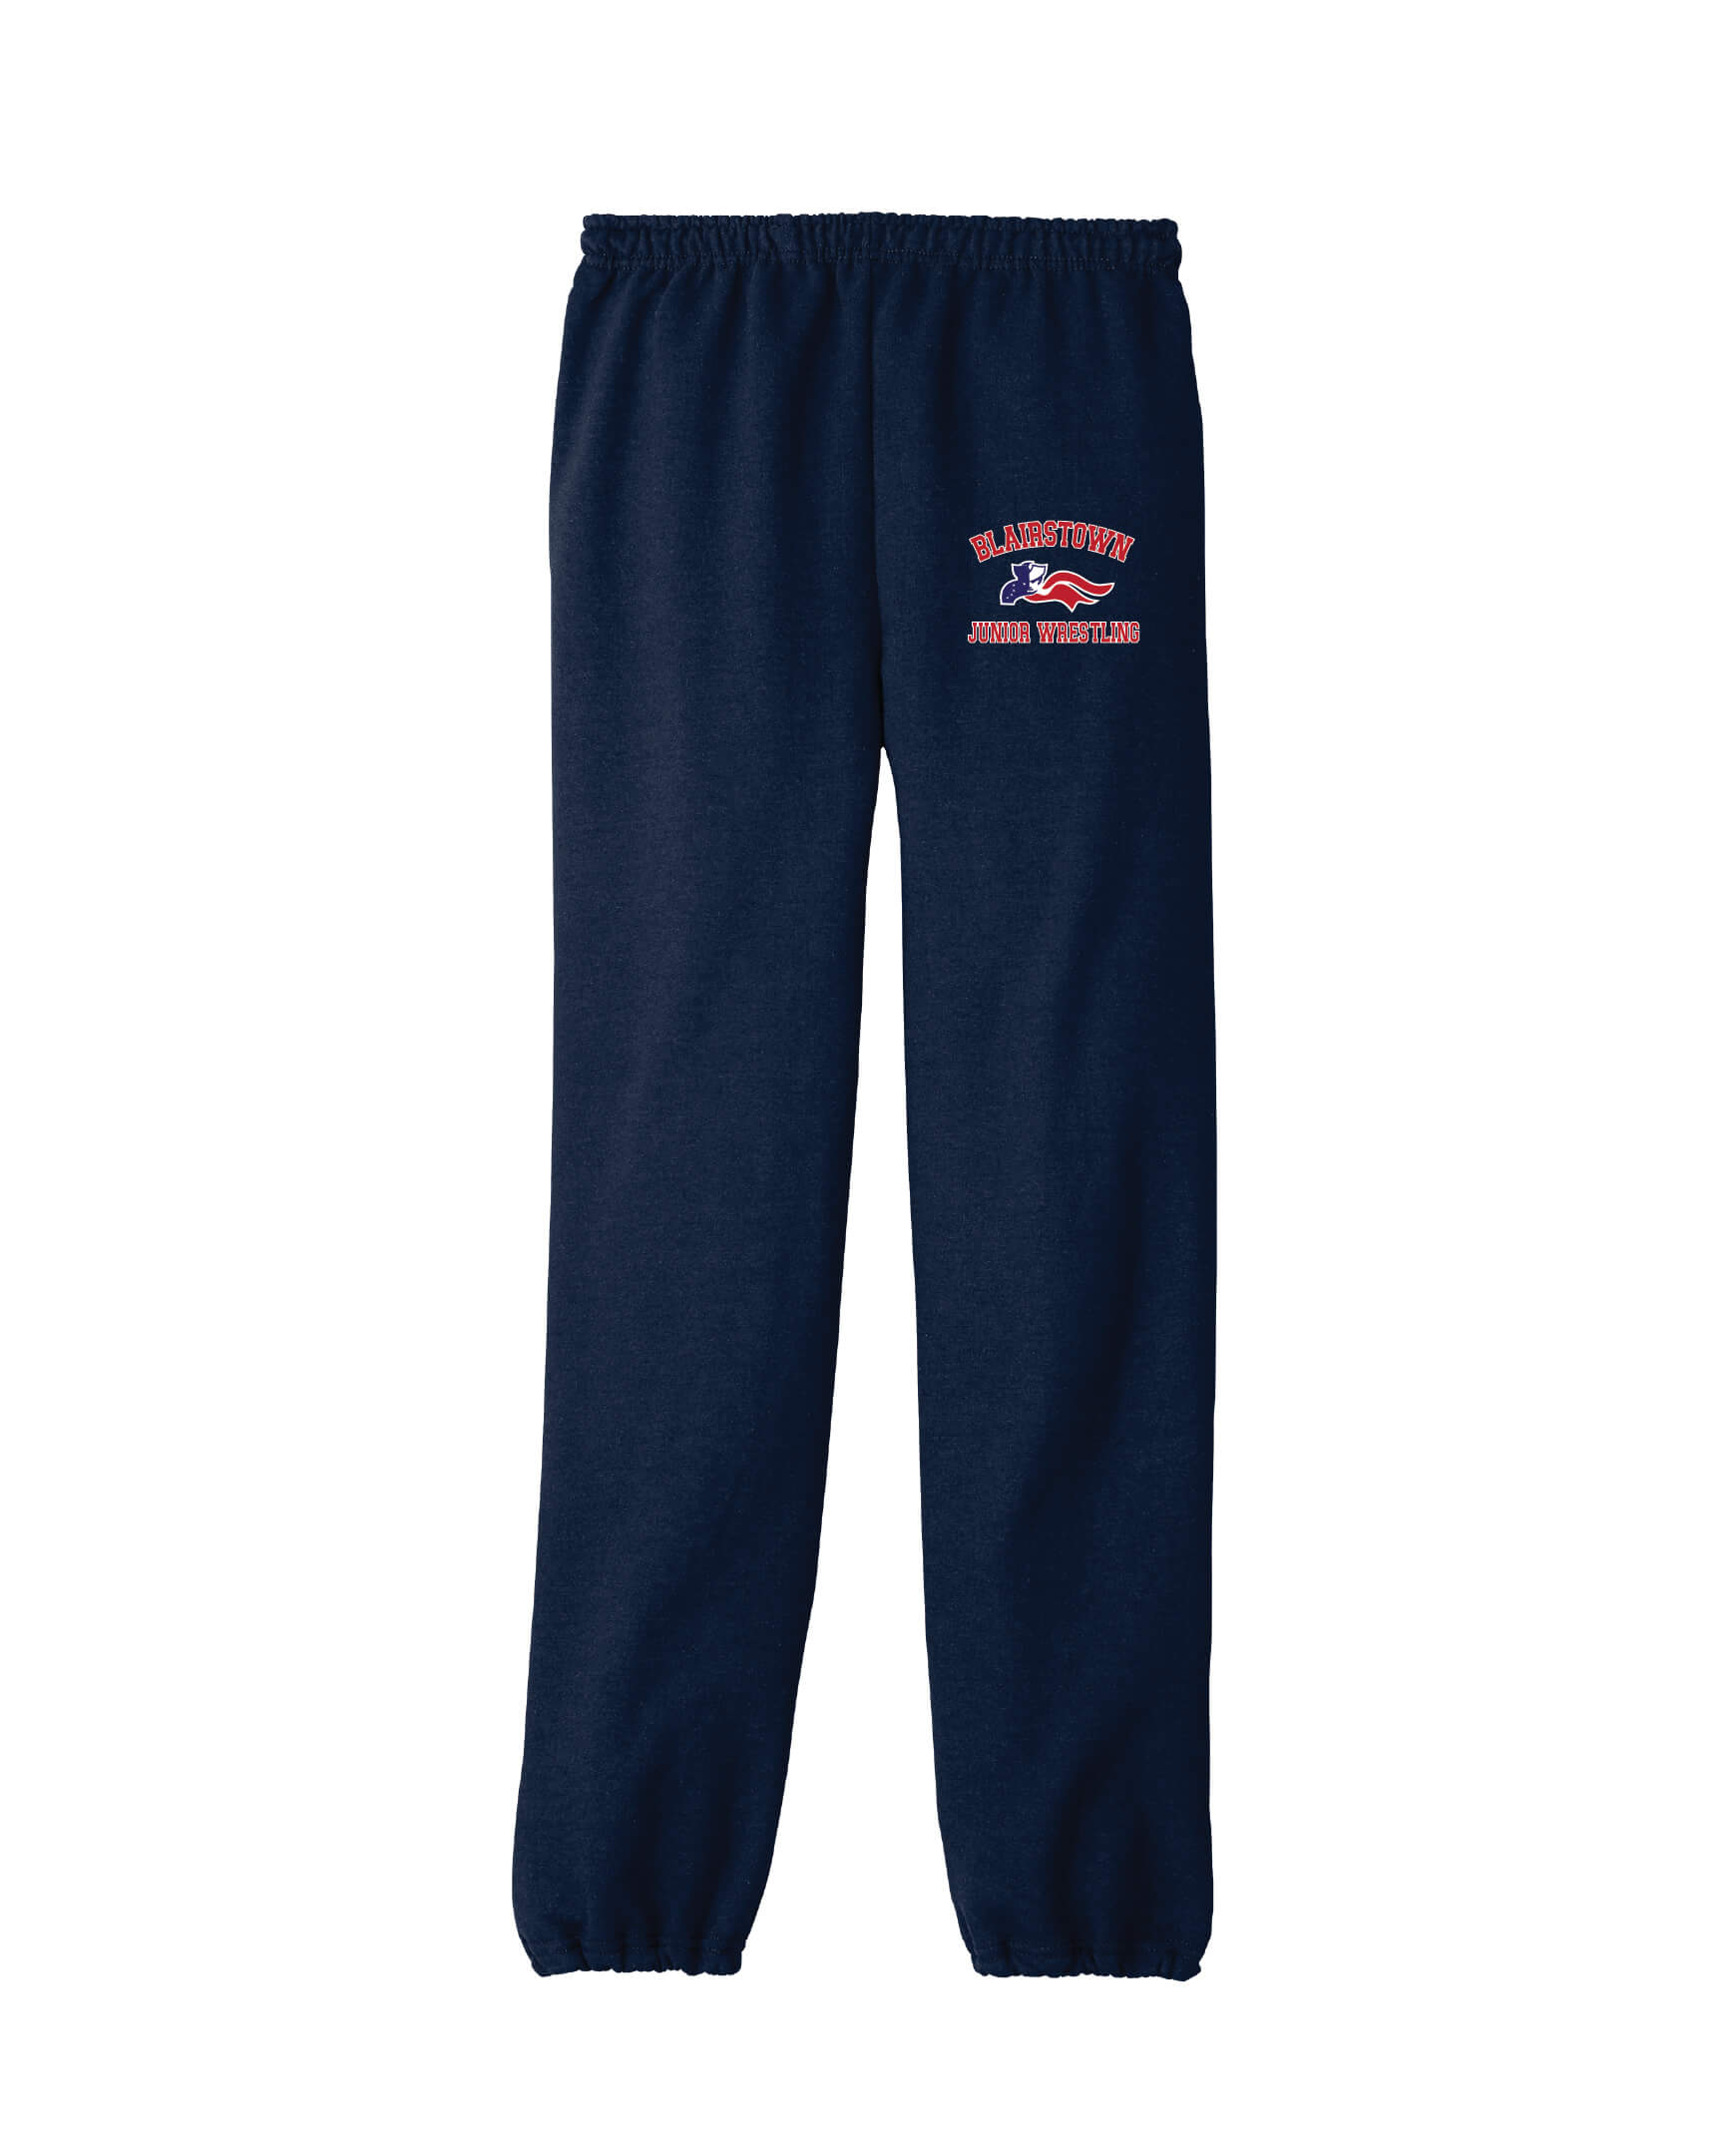 Sweatpants (Youth) navy